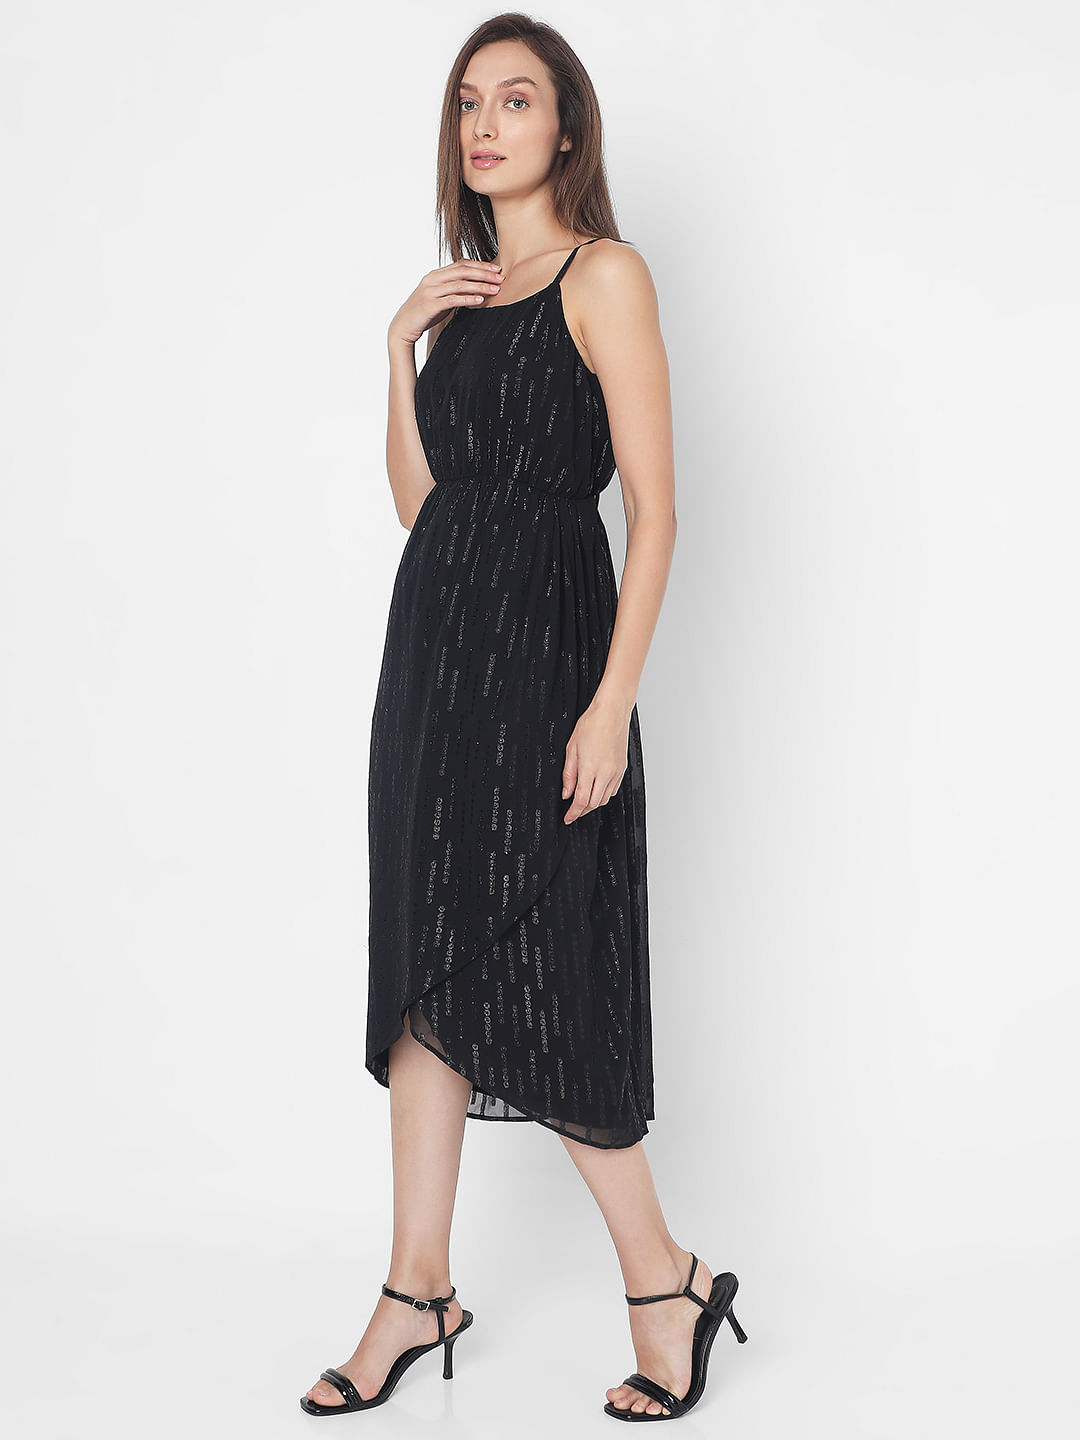 Found: A Classy & Casual Black Midi Dress For Everyday - The Mom Edit